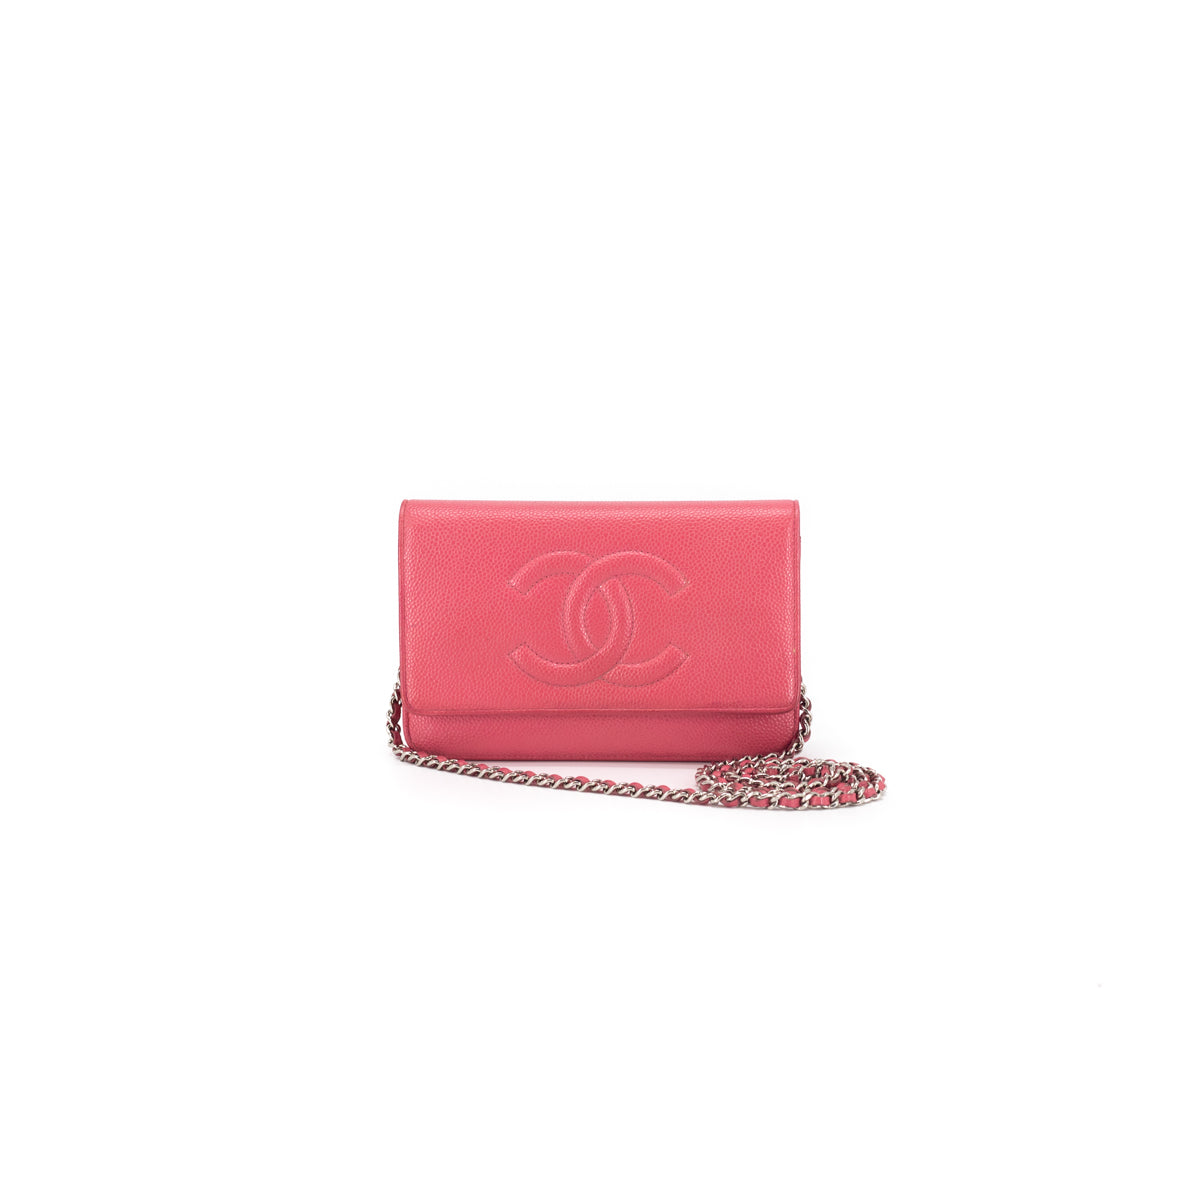 Chanel Quilted Wallet On Chain WOC With Pearl Chain Pink Aged Gold Har –  Coco Approved Studio